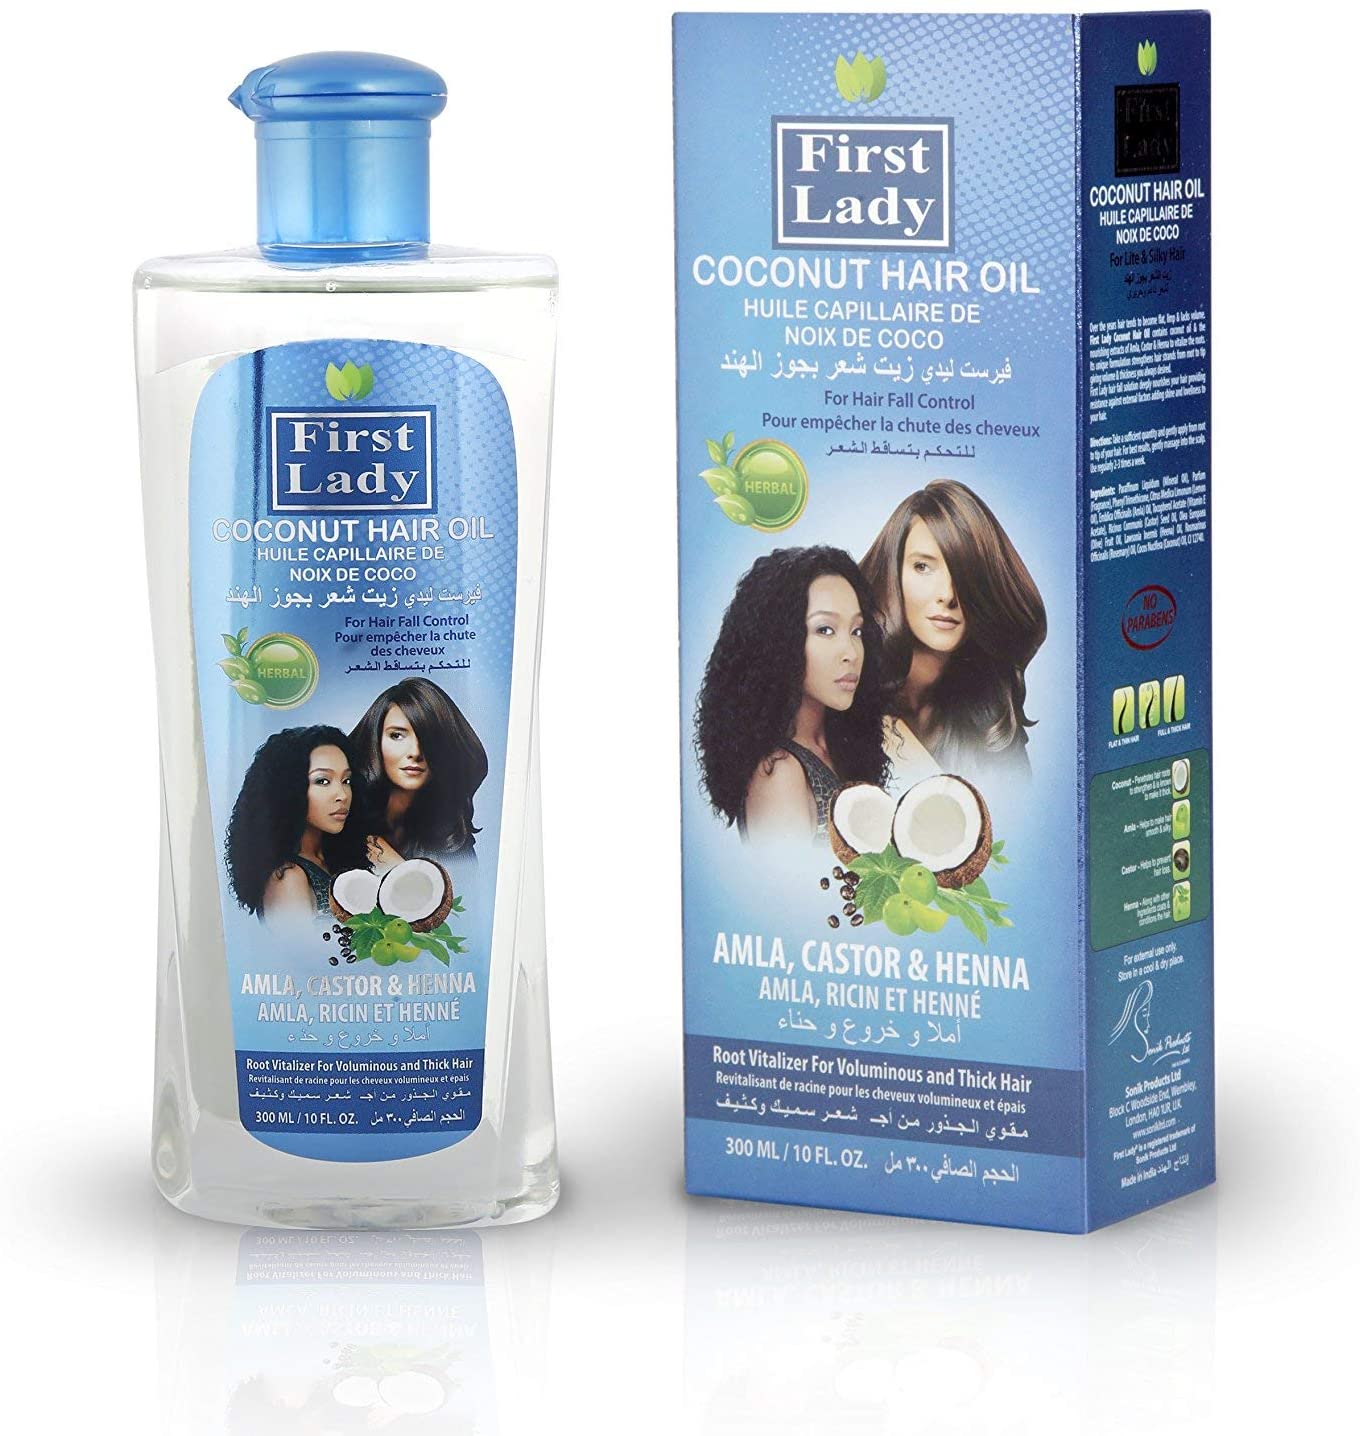 First Lady Coconut Hair Oil strengthens hair strands, adds volume & thickness, deeply nourishes. Contains coconut oil & extracts of Amla, Castor & Henna.